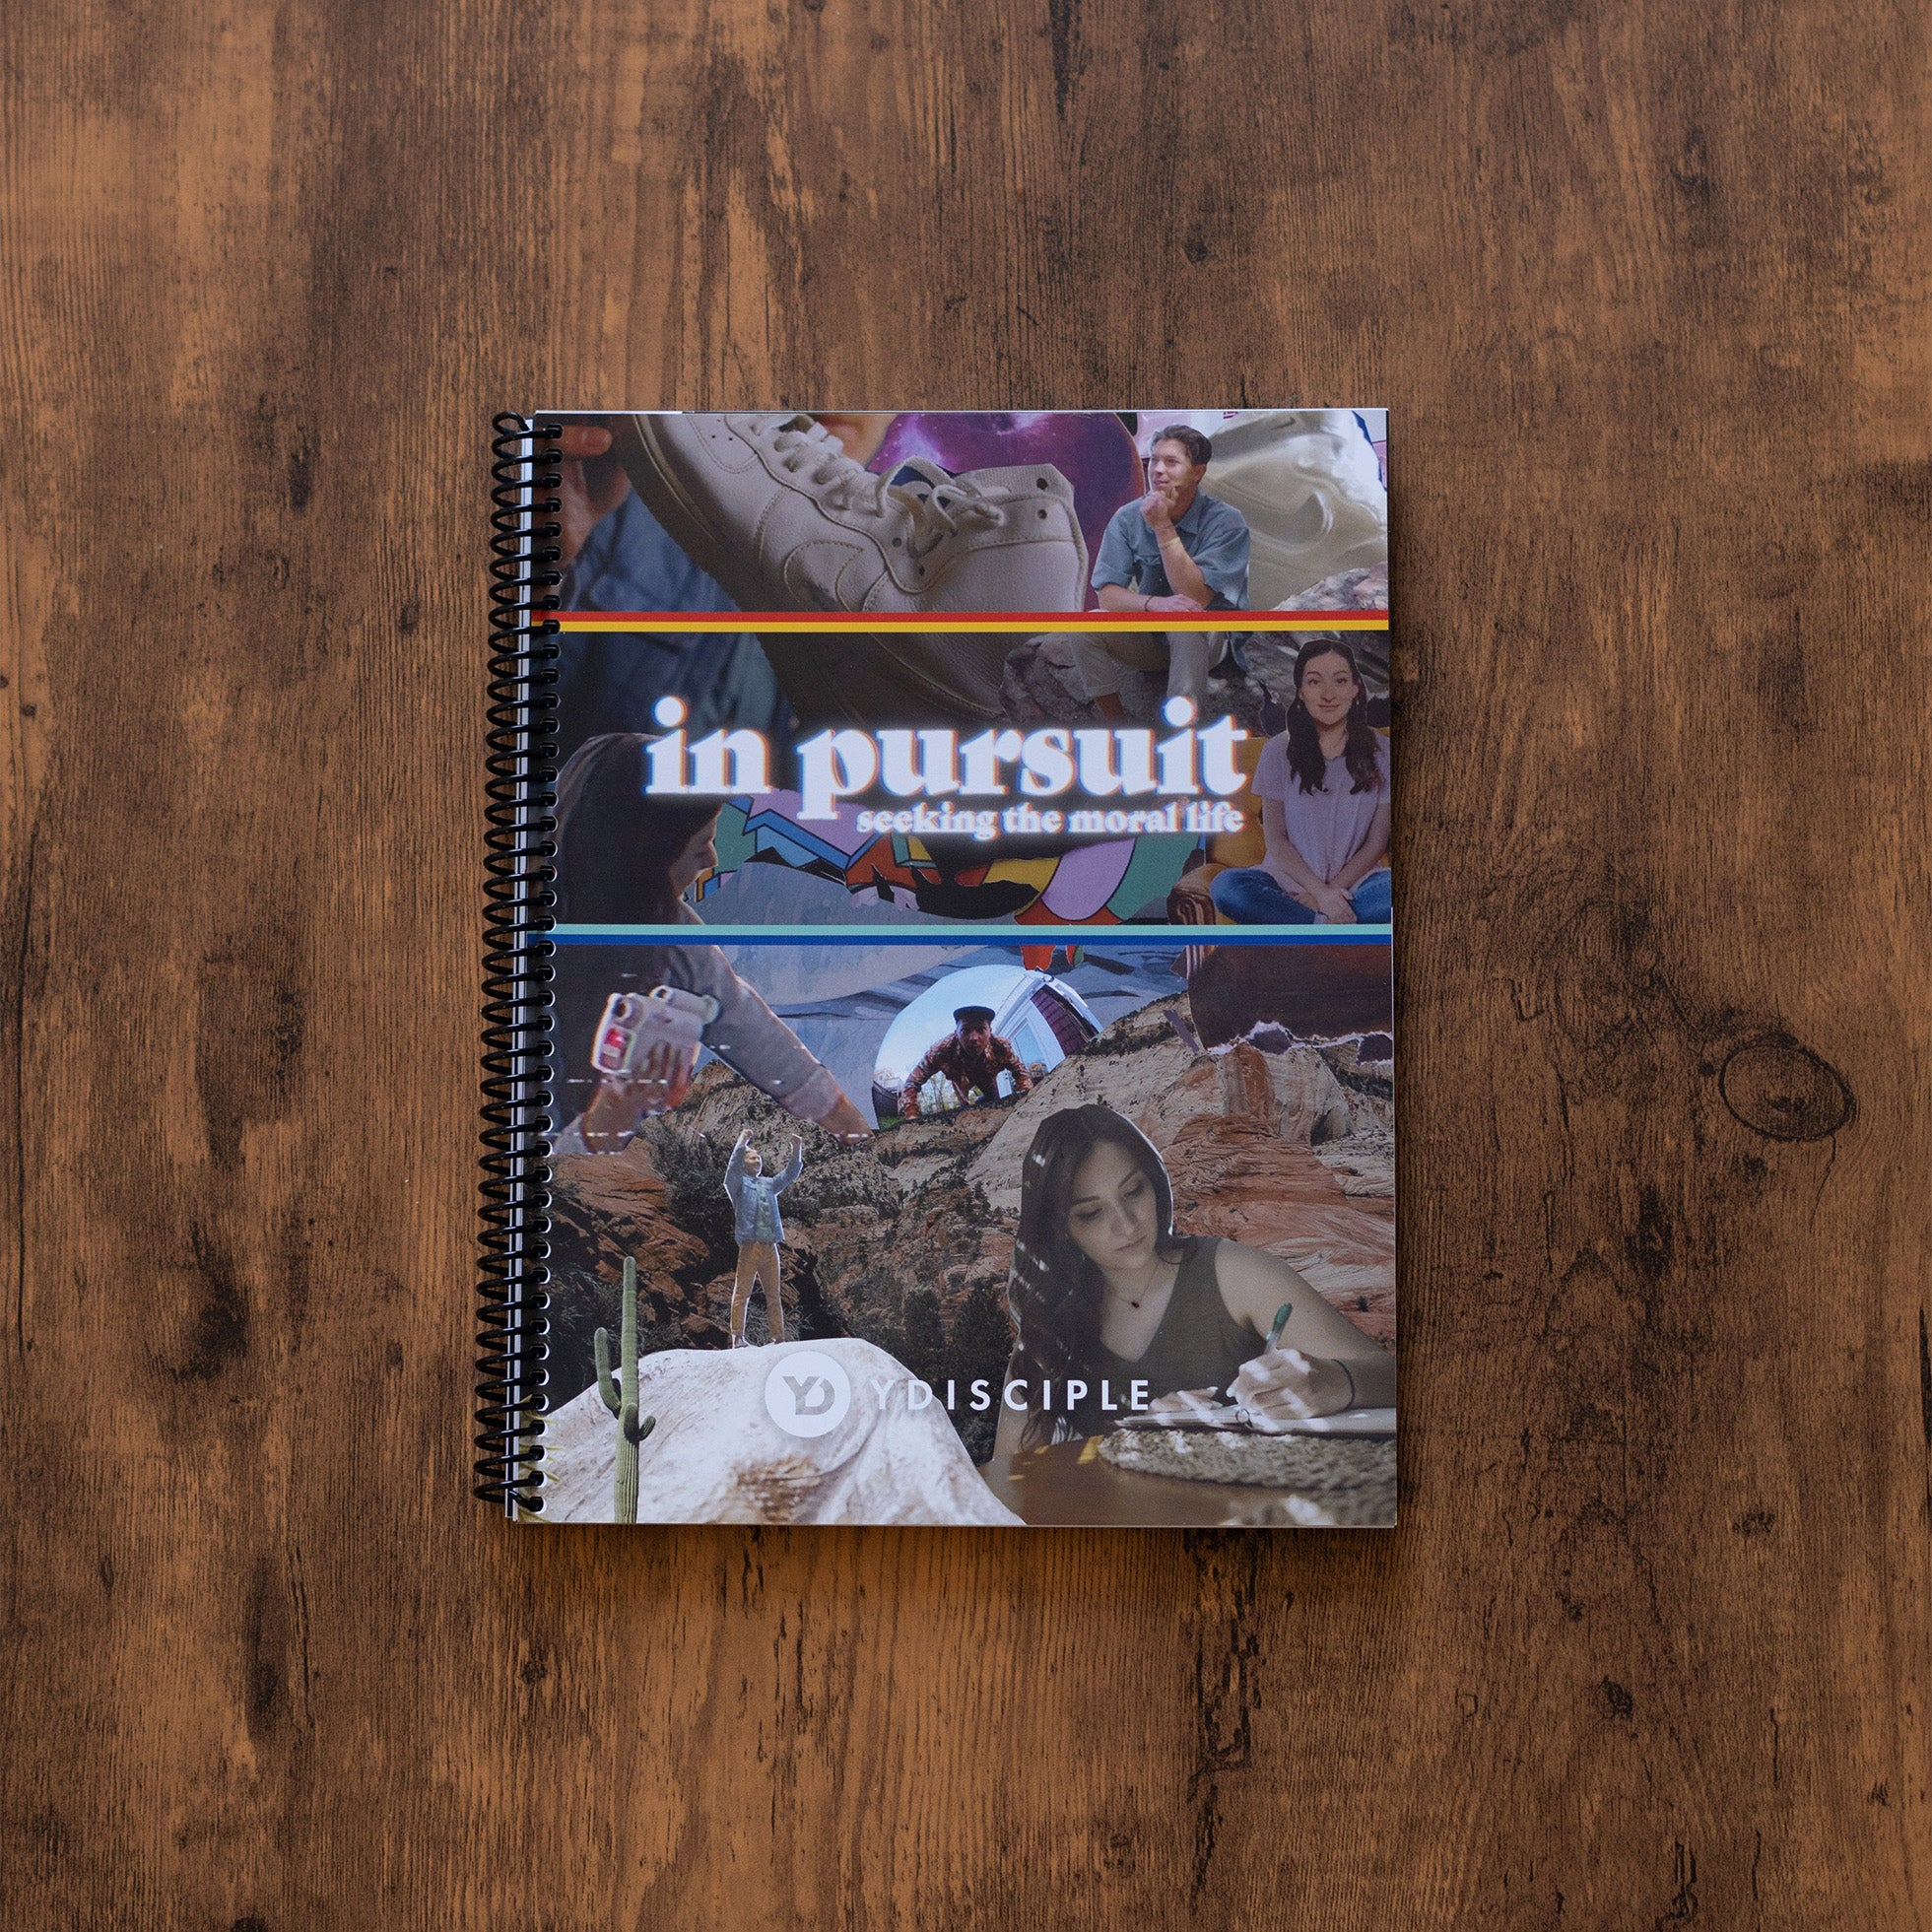 In Pursuit: Seeking the Moral Life (DVD & Book Set)